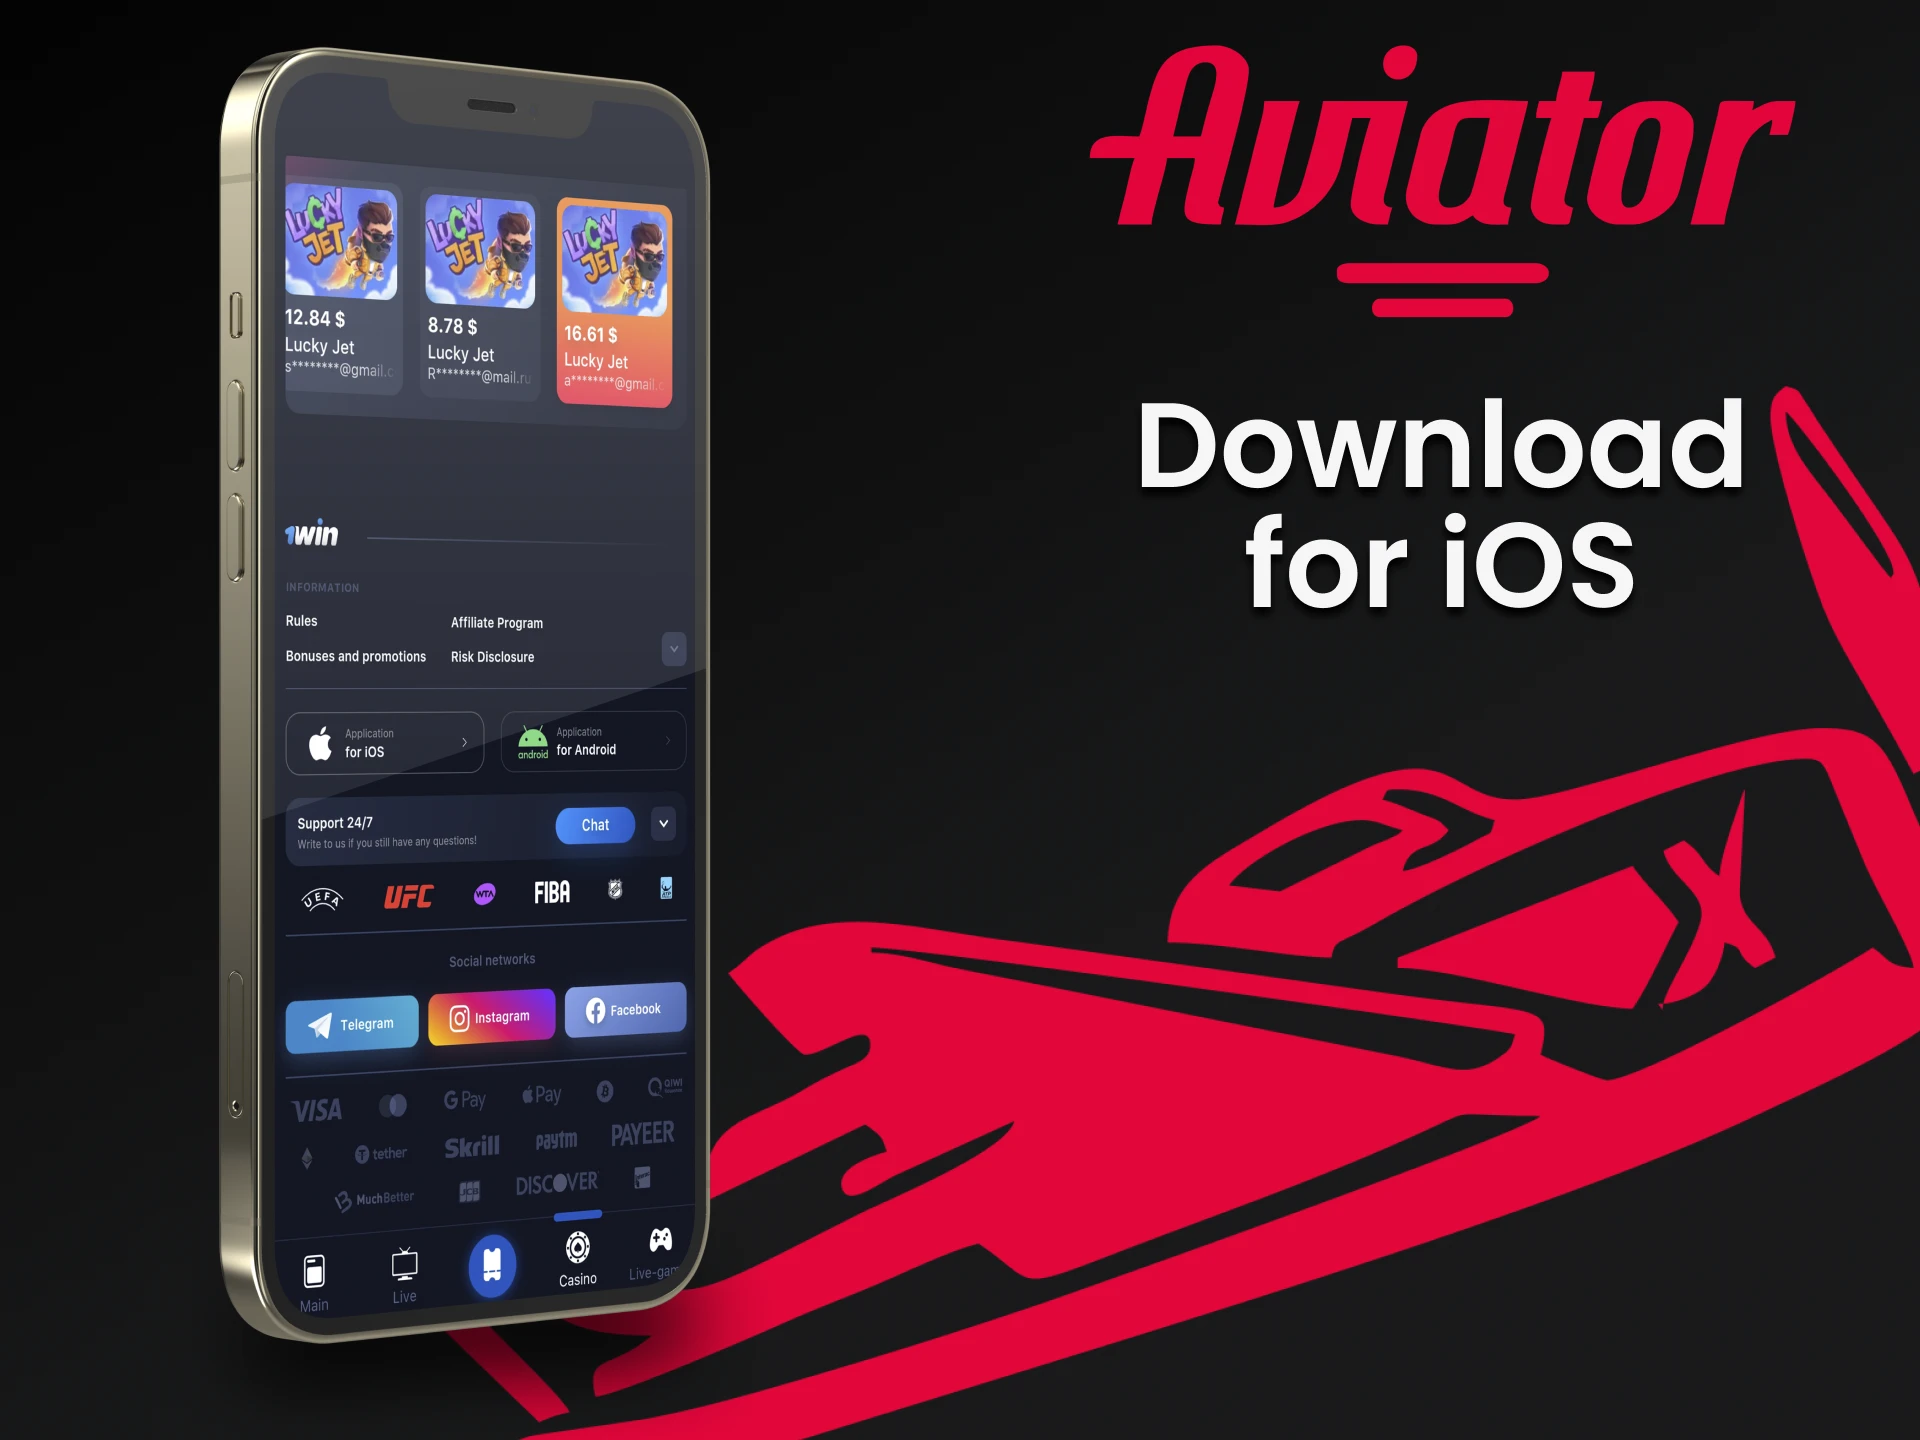 Download the application on your iOS device to play Aviator.